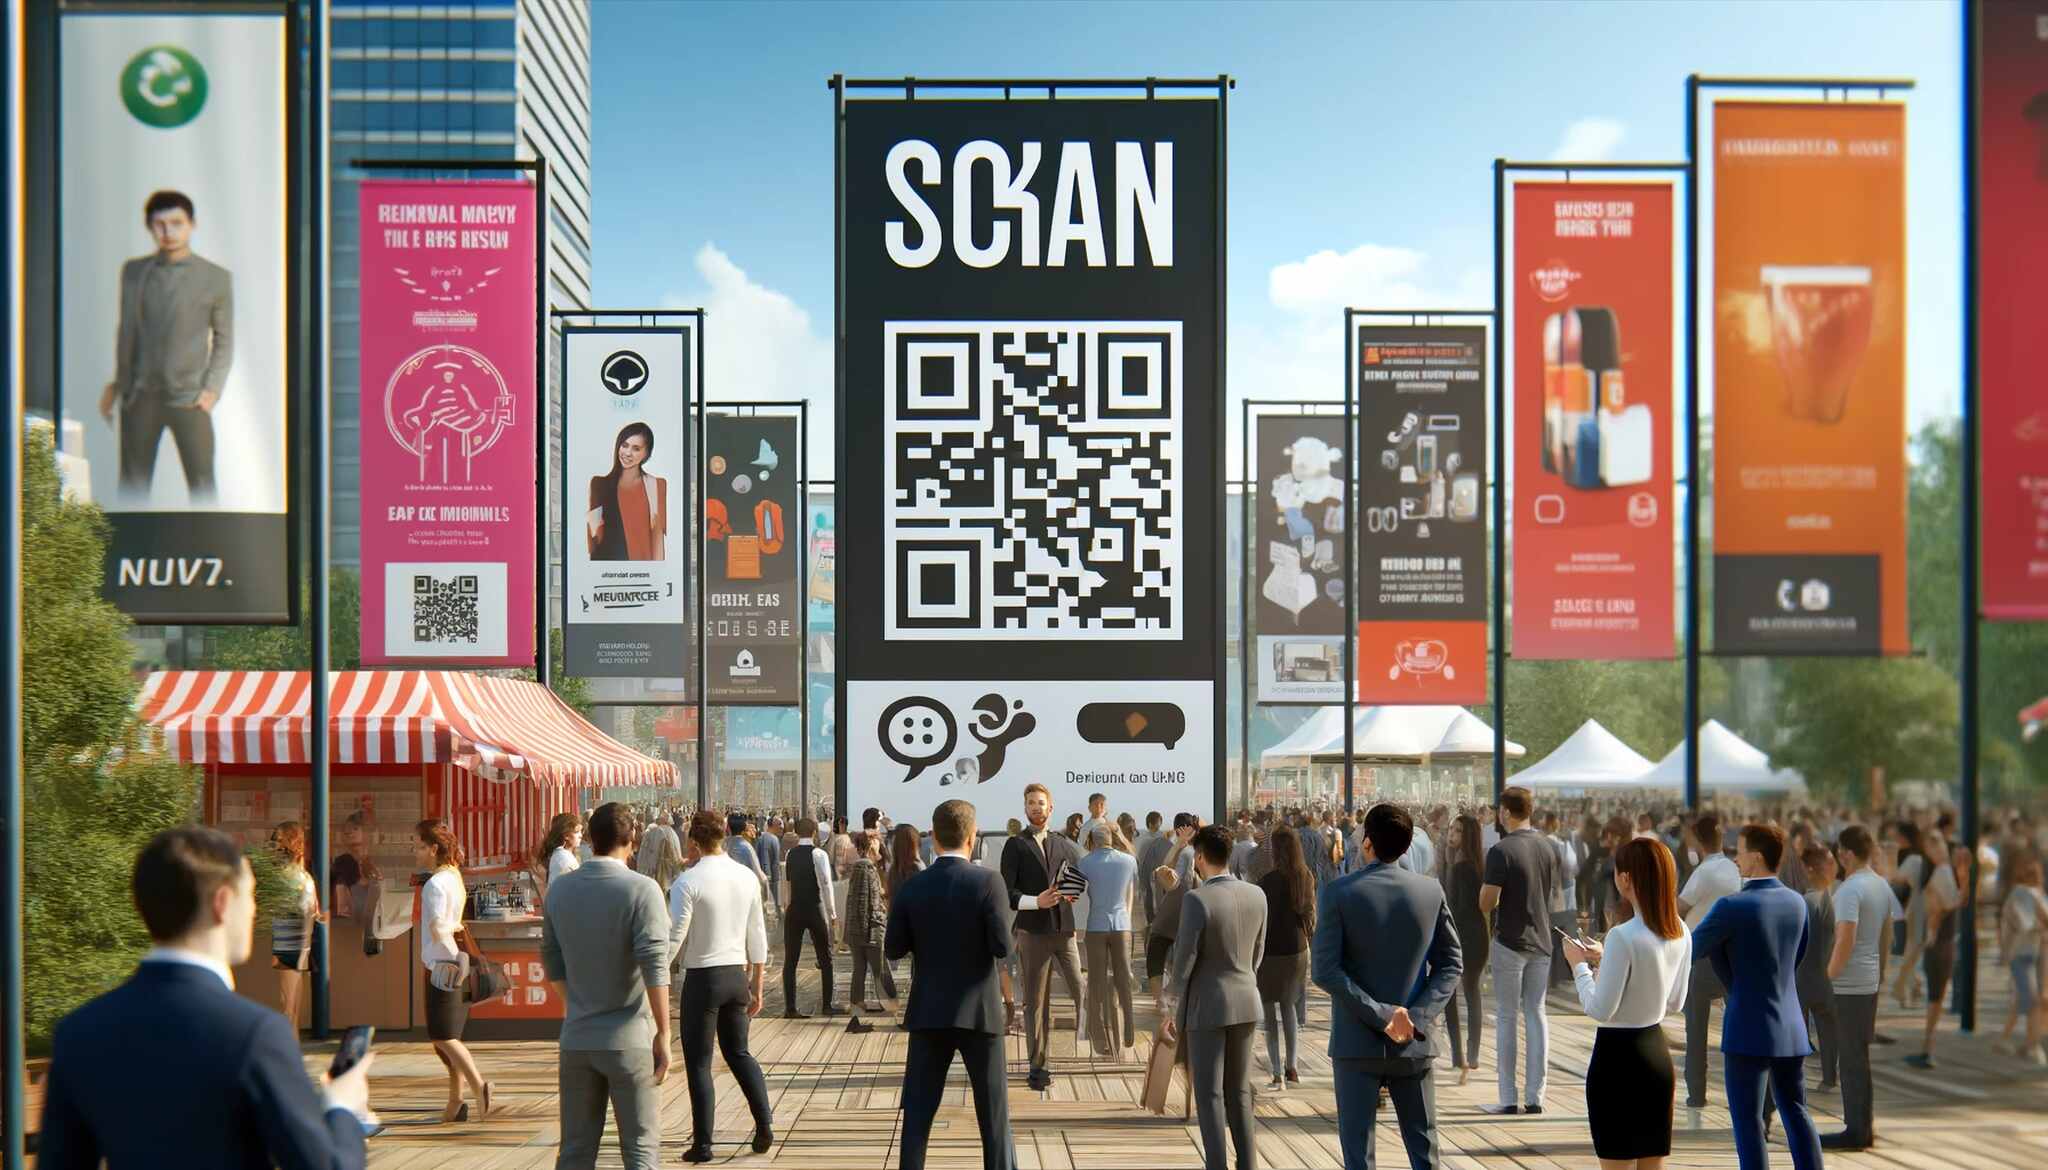 outdoor marketing event with various QR codes on banners prominently displayed